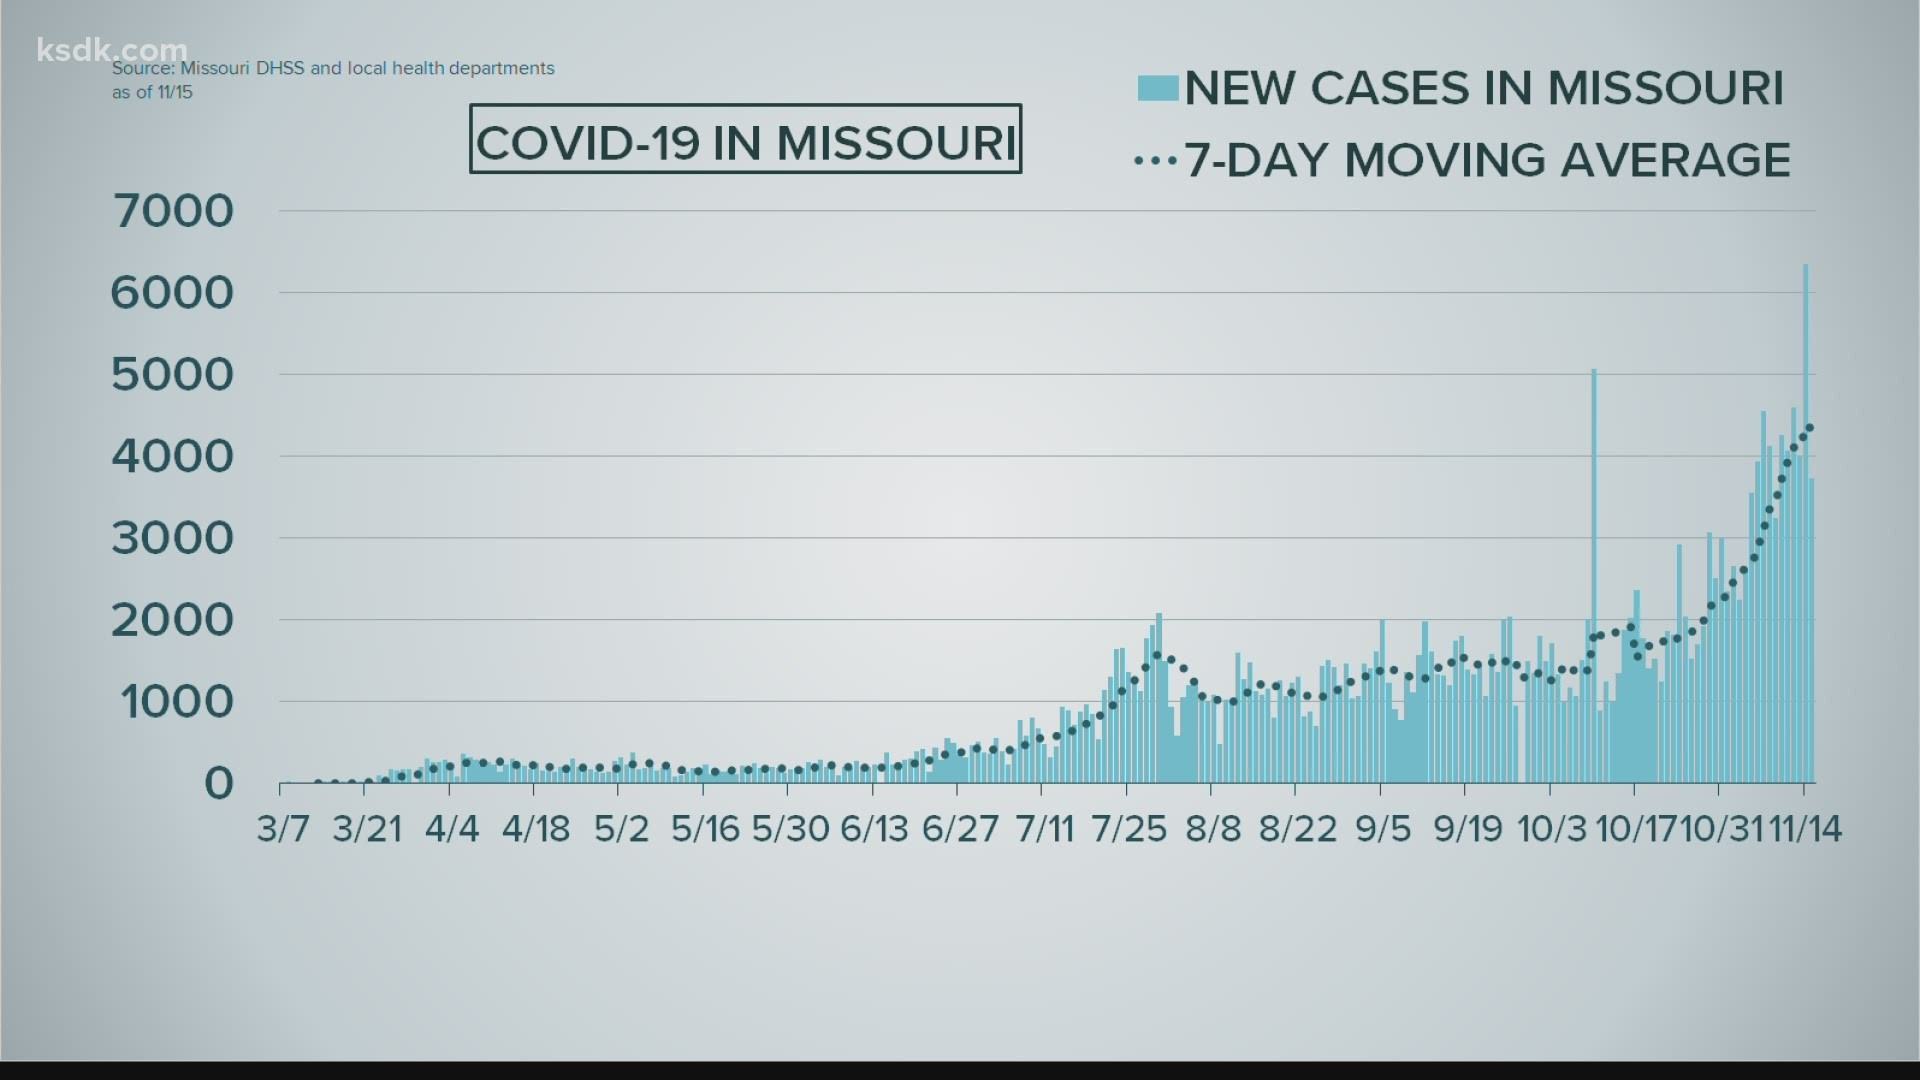 3,729 new confirmed cases in the state of Missouri Sunday